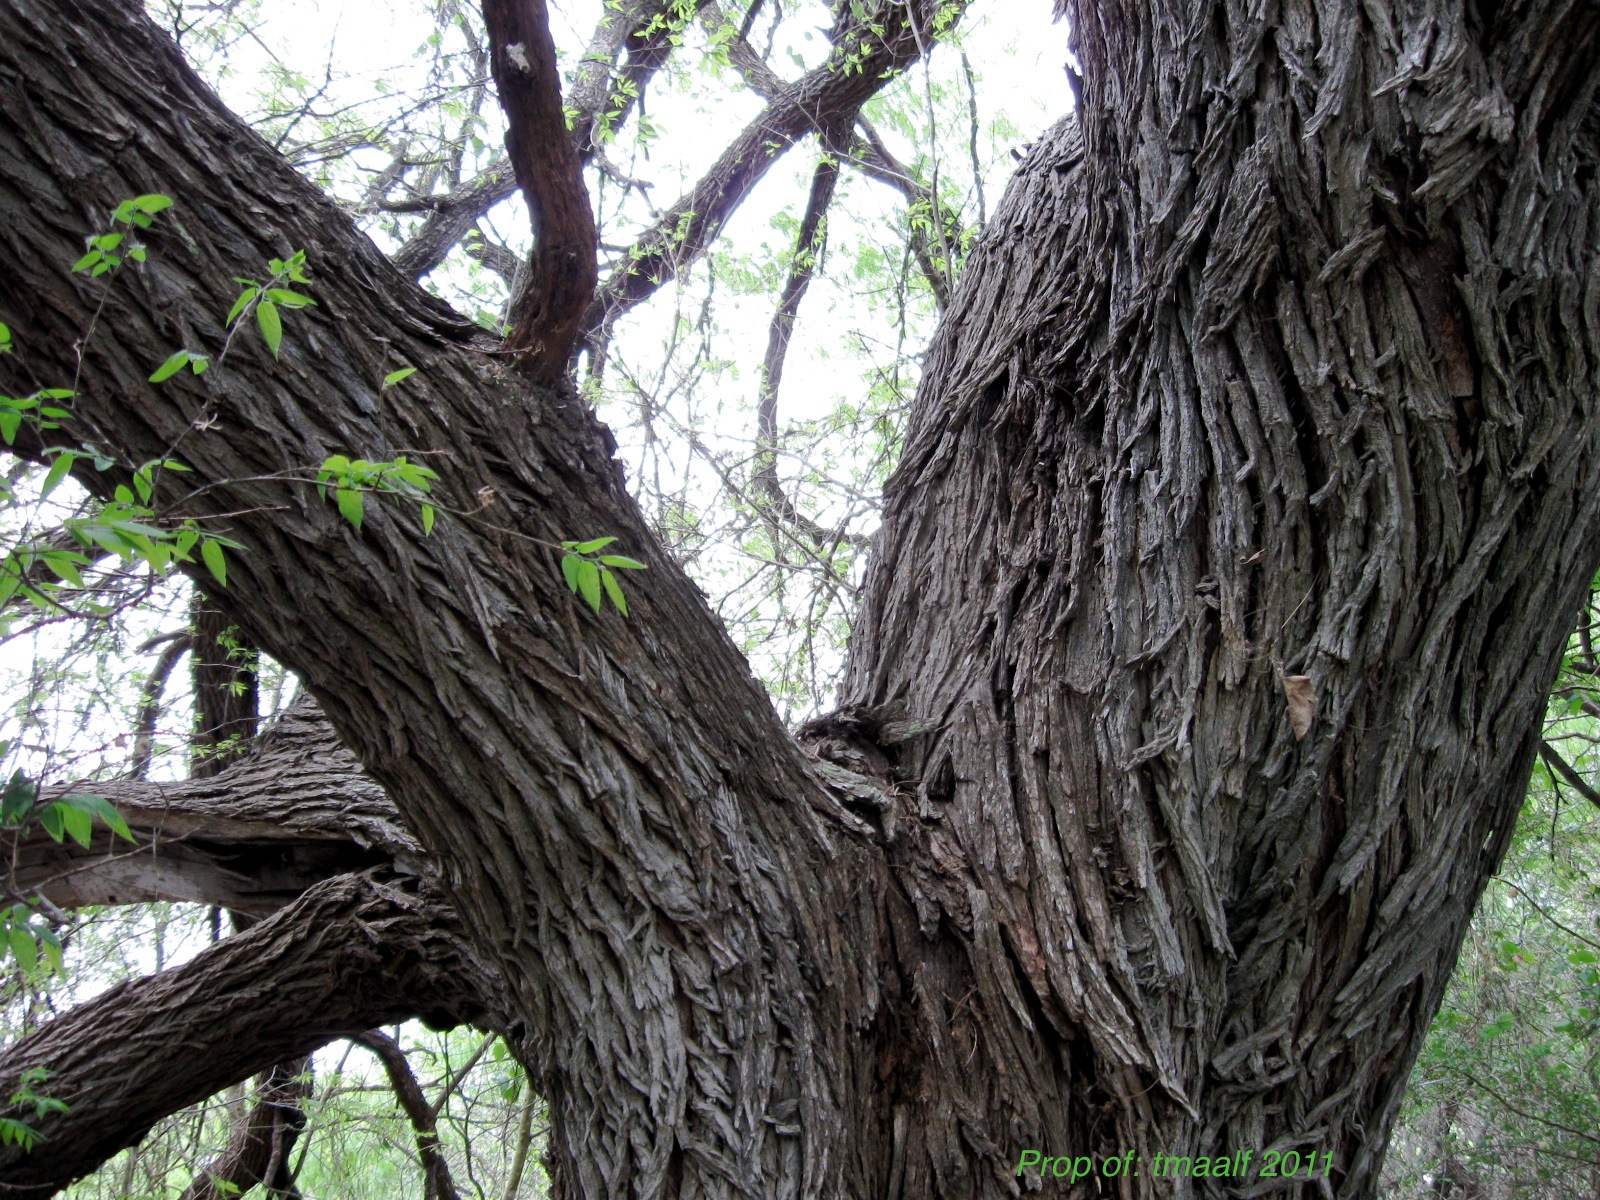 Two Men and a Little Farm: OLD MESQUITE TREE CLOSEUP